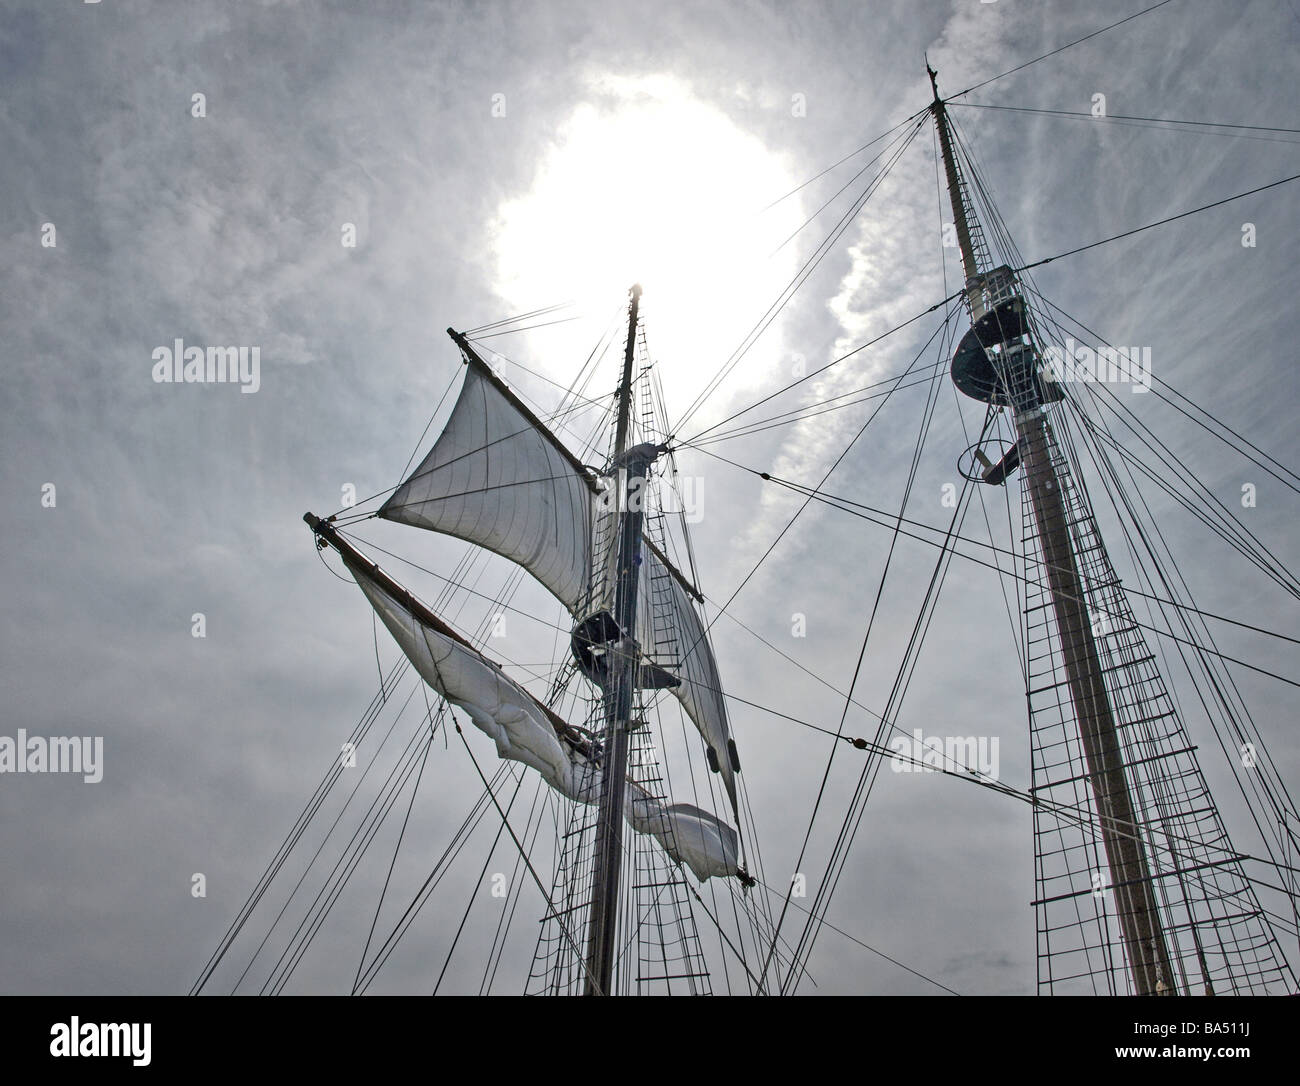 tall-ship tall-ships two of three masts looking upward with bright sun and gray clouds, sail unfurled ropes lines and ladders Stock Photo